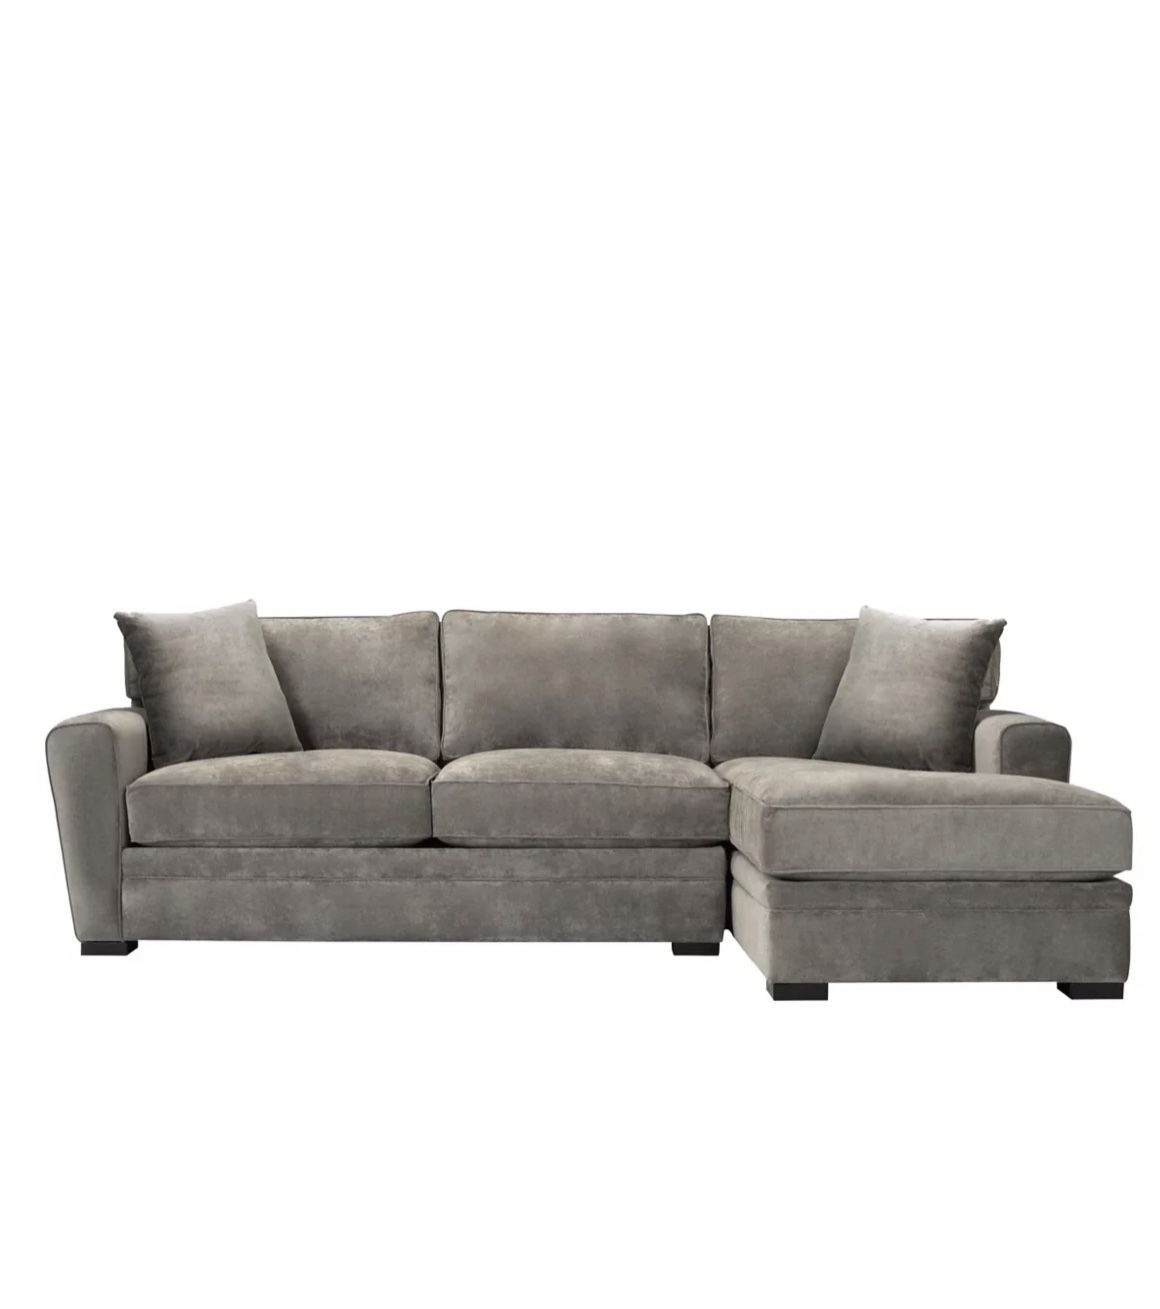 Raymour and Flanigan:  Artemis II 2-pc. Full Sleeper Right Hand Facing Sectional Sofa